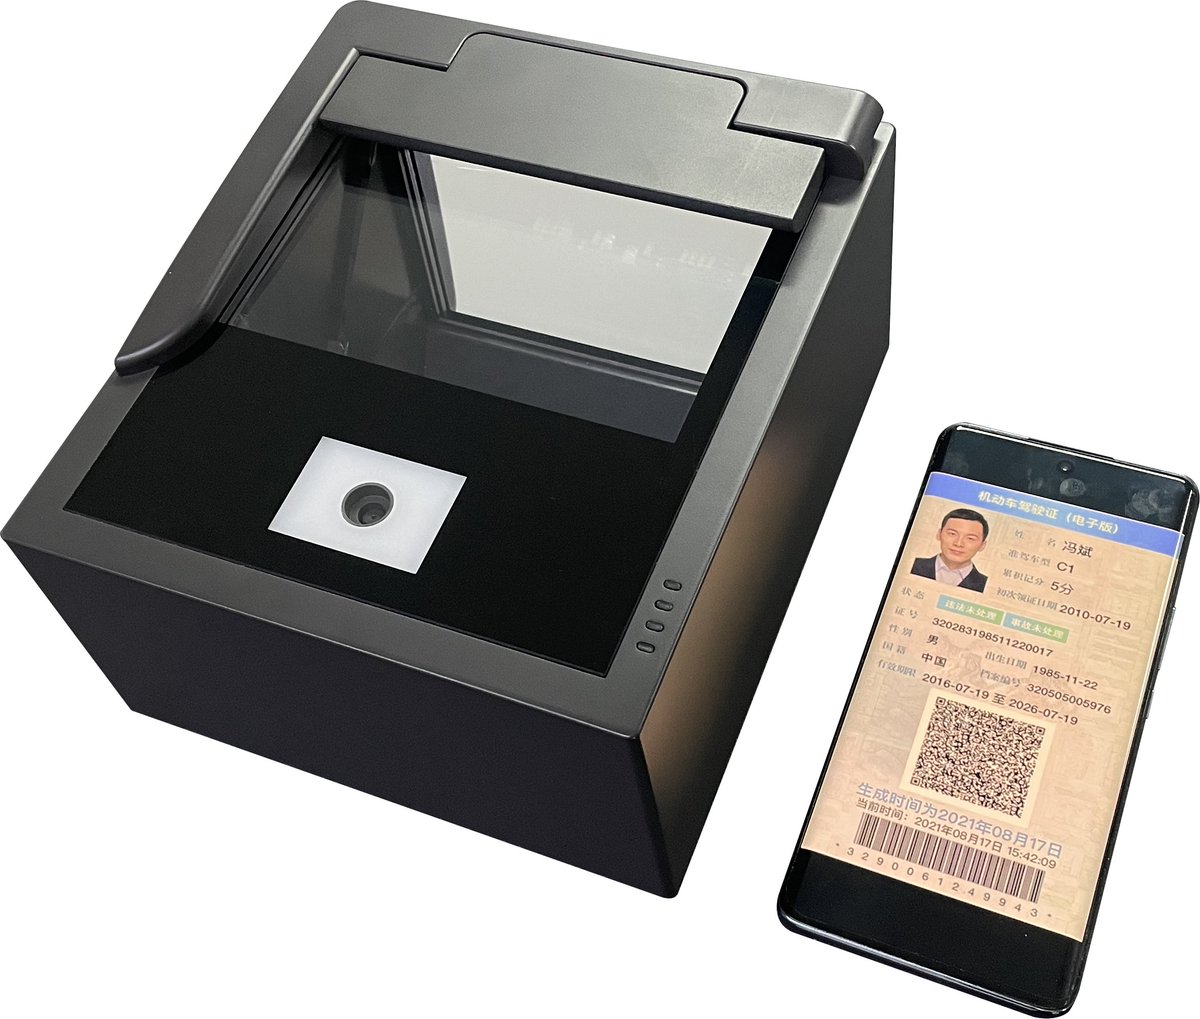 #Sinosecu KR(B) model comes with a Barcode/QR code scanner that can read e-identity card barcodes on mobile devices. Support 1D and 2D barcodes from printed documents and mobile phones.
#passportreader #barcode #qrcode #eidentity #kiosk